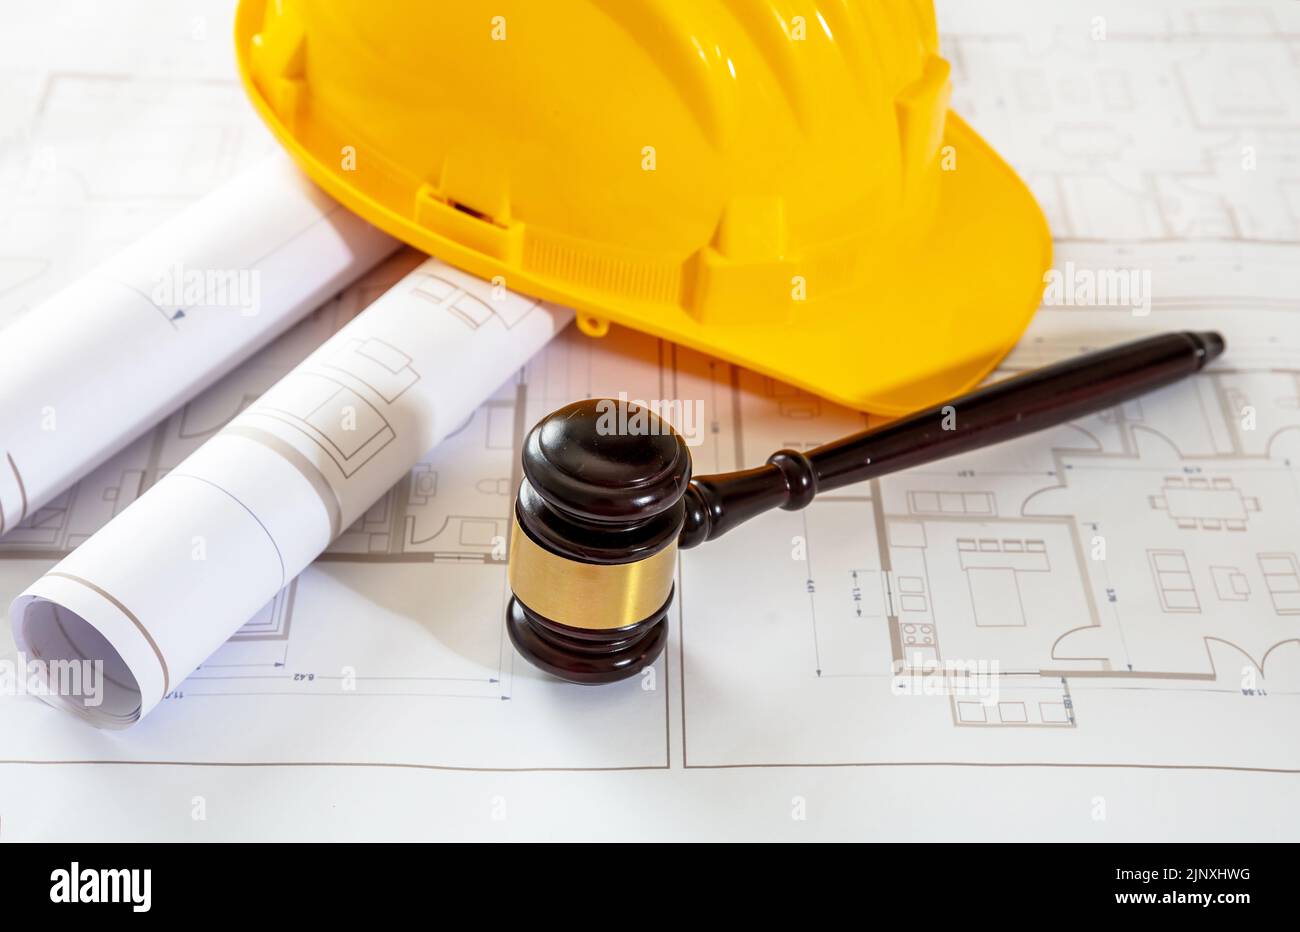 Labor, Construction law. Yellow safety hardhat and judge gavel on building blueprint plans Stock Photo